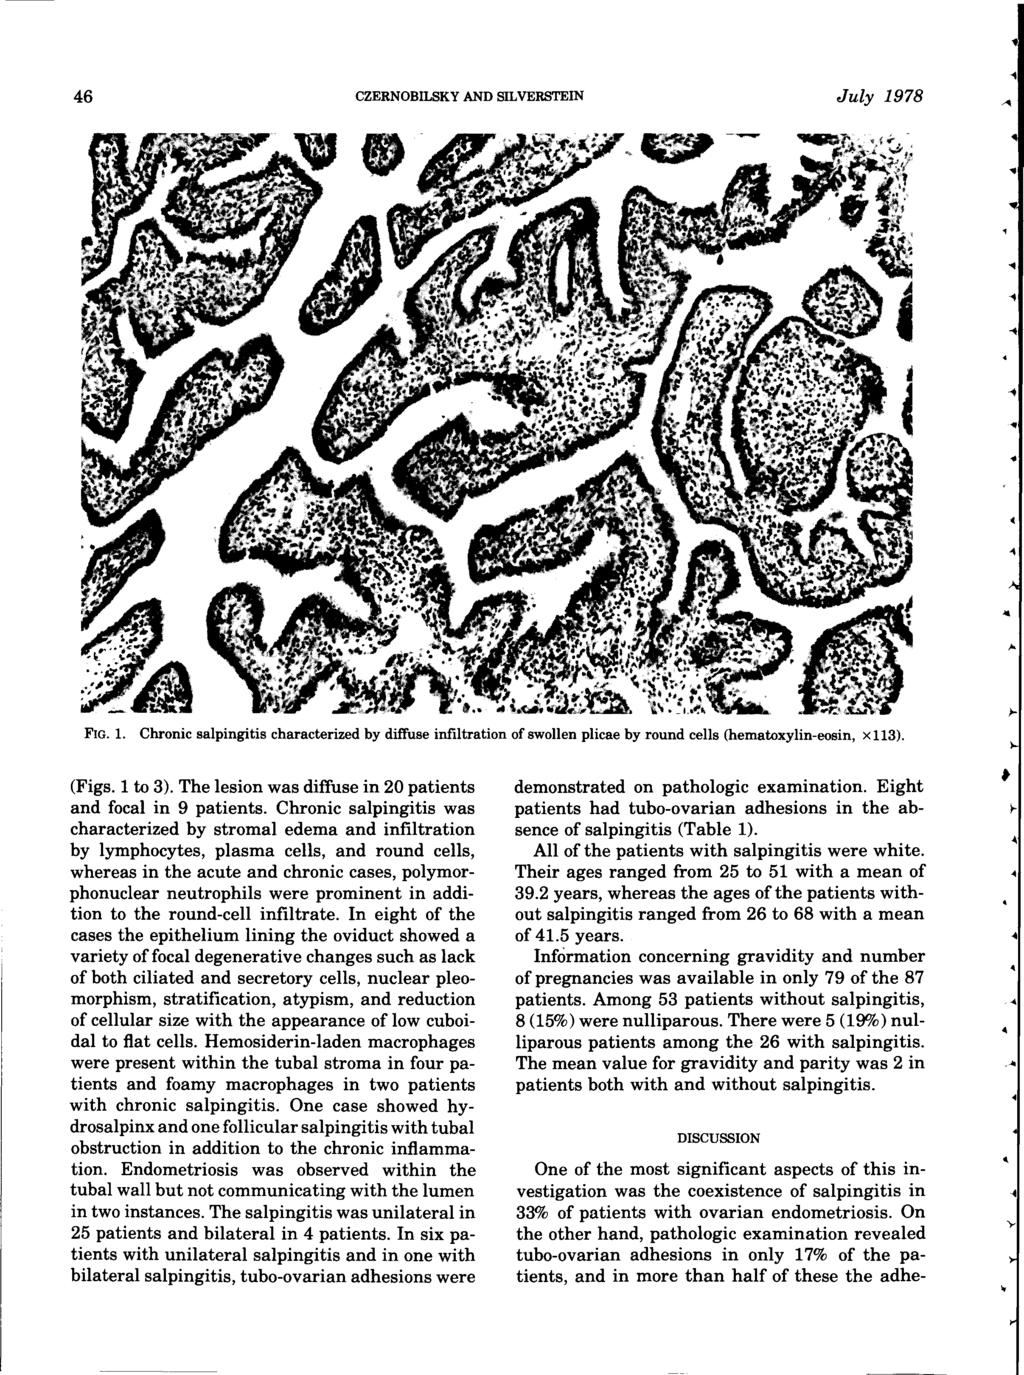 . 46 CZERNOBILSKY AND SILVERSTEIN July 1978 FIG. 1. Chronic salpingitis characterized by diffuse infiltration of swollen plicae by round cells (hematoxylin-eosin, x 113). (Figs. 1 to 3).